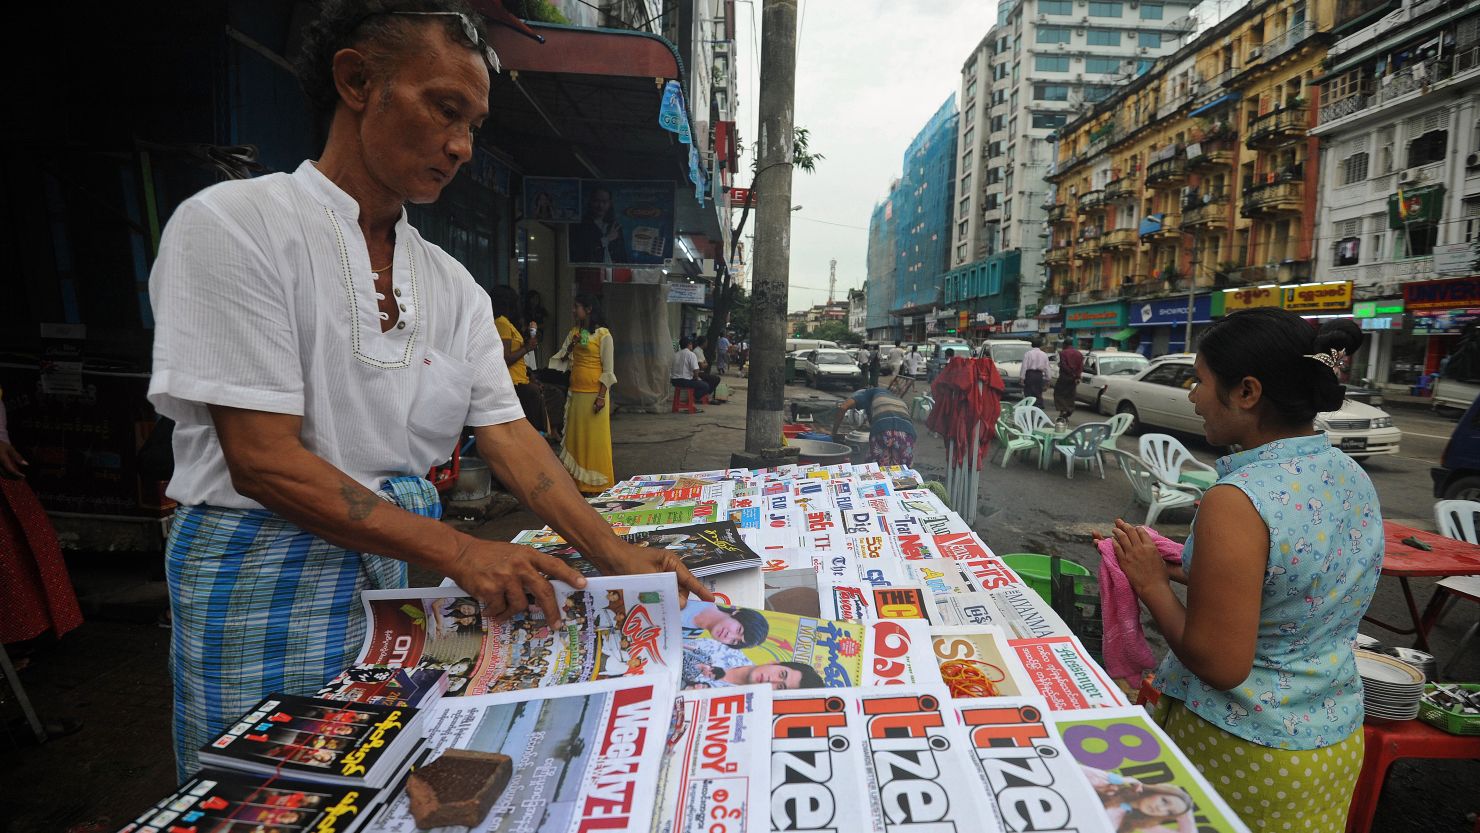 Previously banned newspapers and magazines are now freely available in Myanmar's towns and cities.